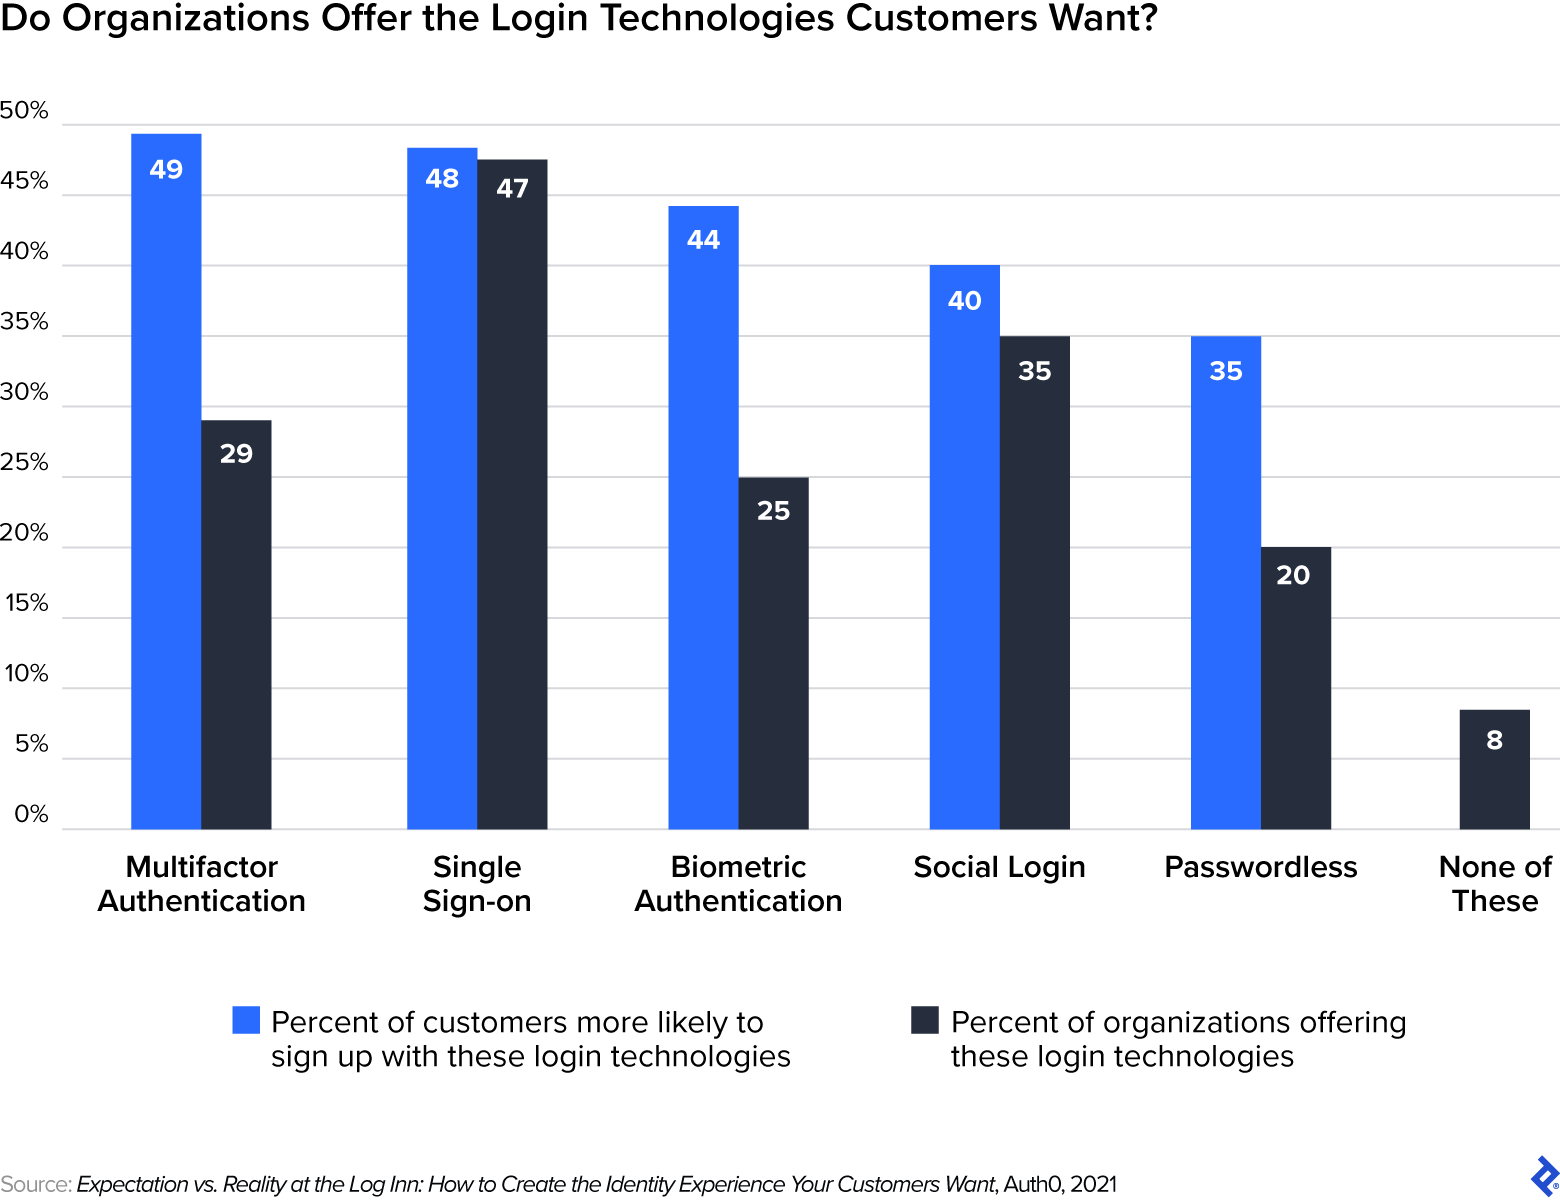 An Auth0 survey found that organizations don’t offer login methods such as multifactor or biometric authentication at the rate customers want them.